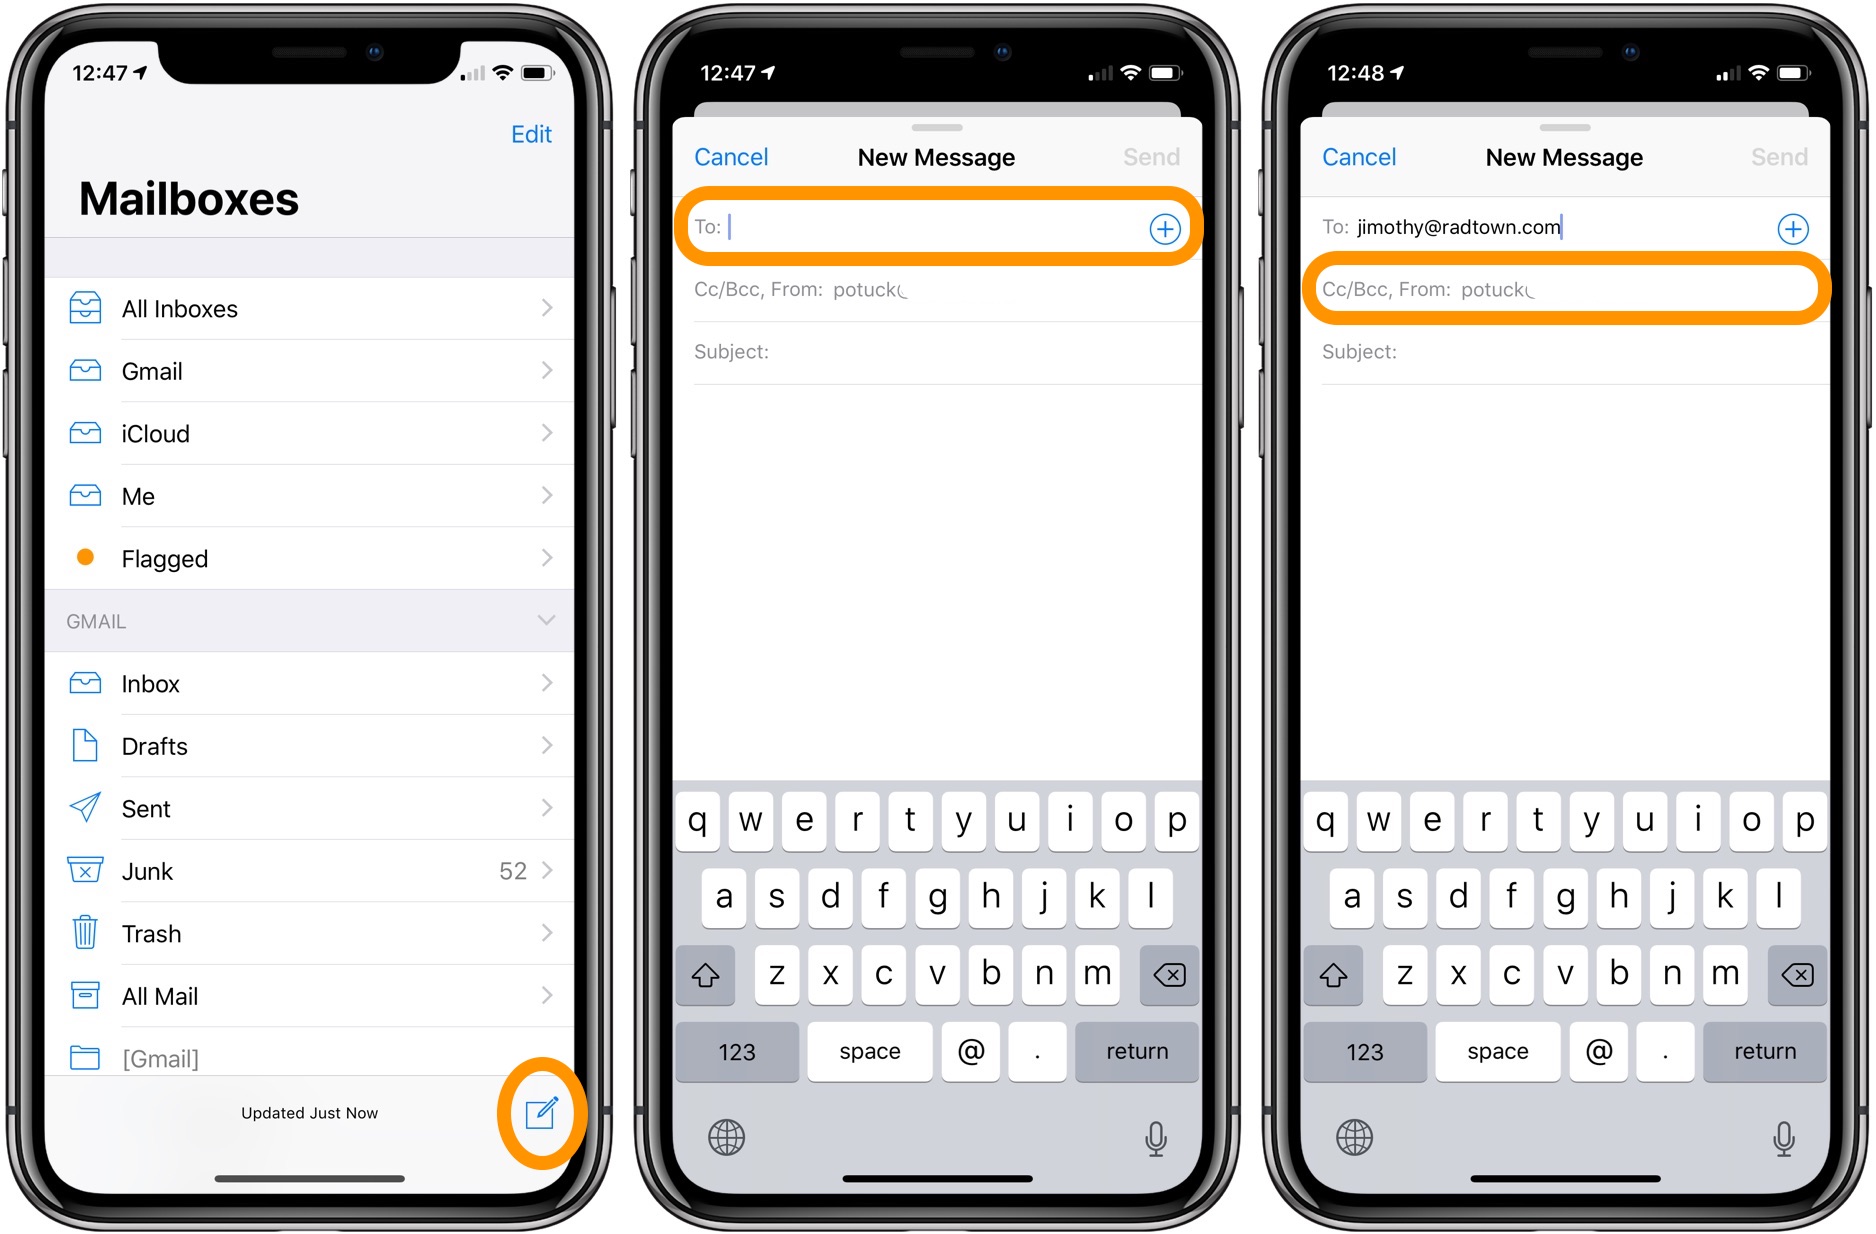 How To Use Cc And c In Email On Iphone Ipad And Mac 9to5mac